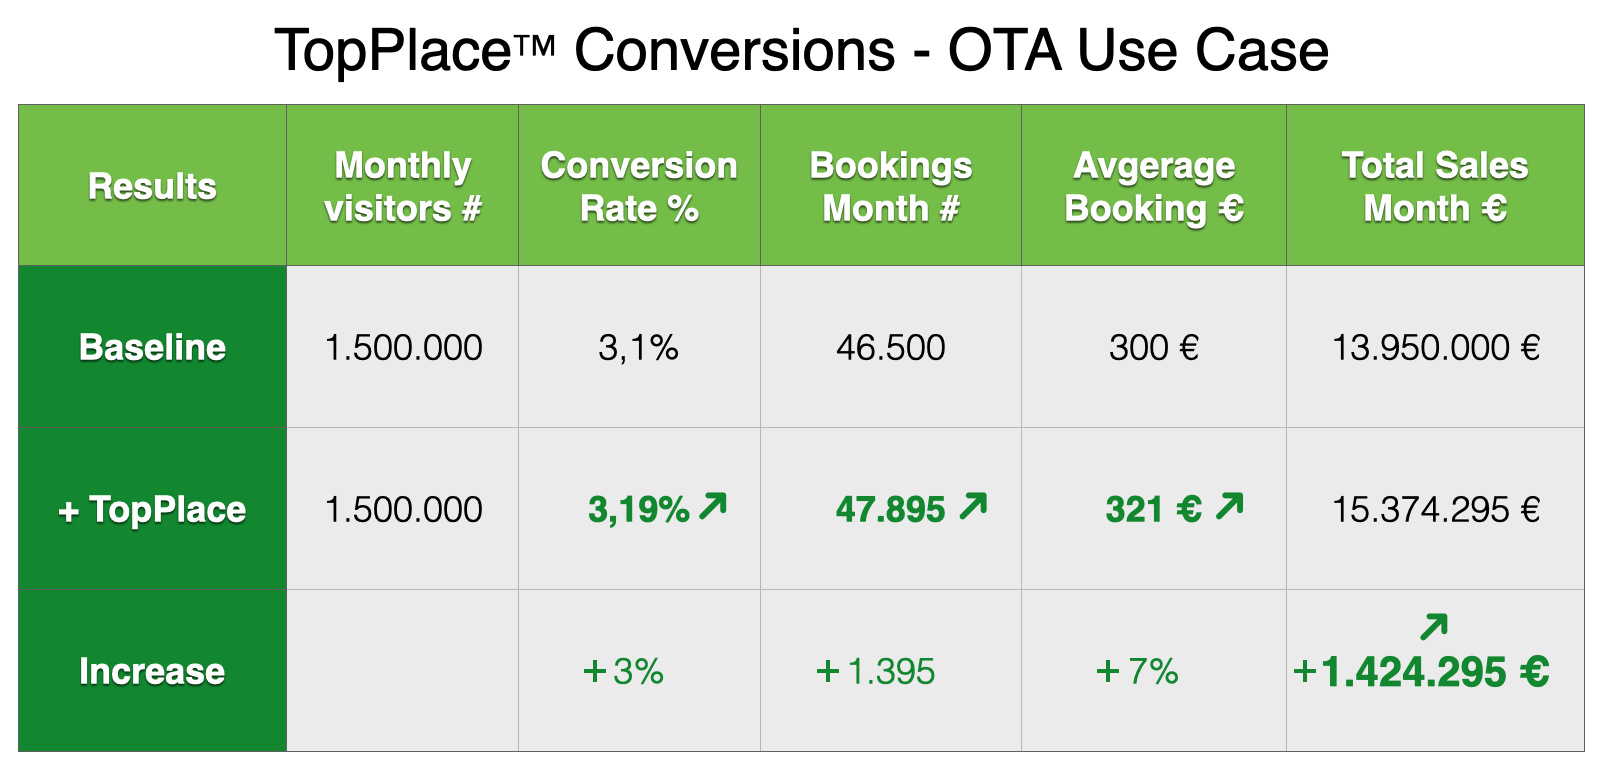 TopPlace™ Uplift in Conversions